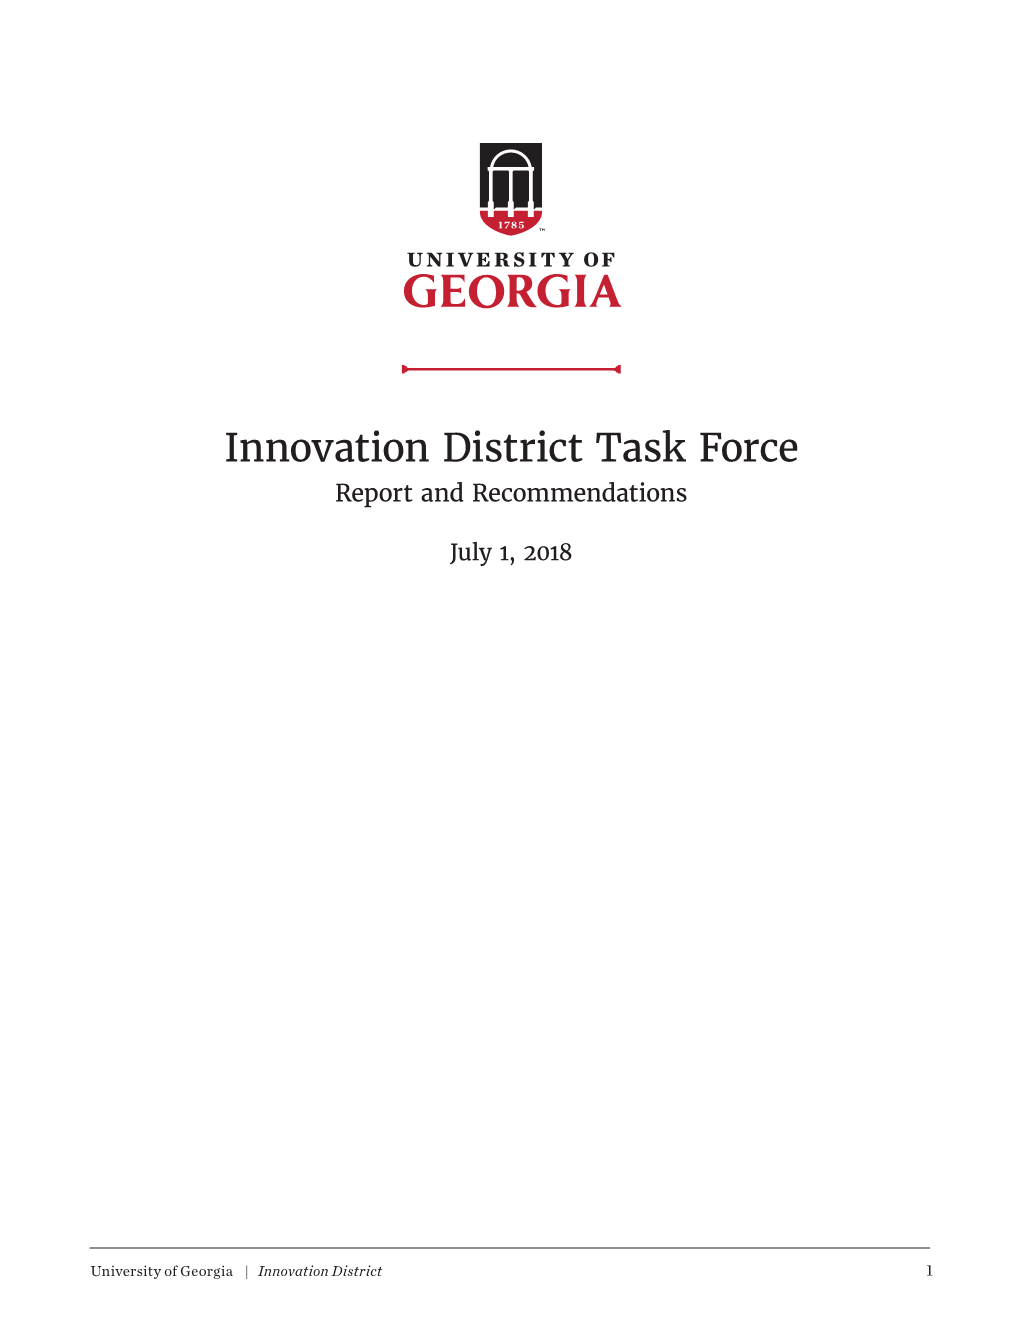 Innovation District Task Force Report and Recommendations